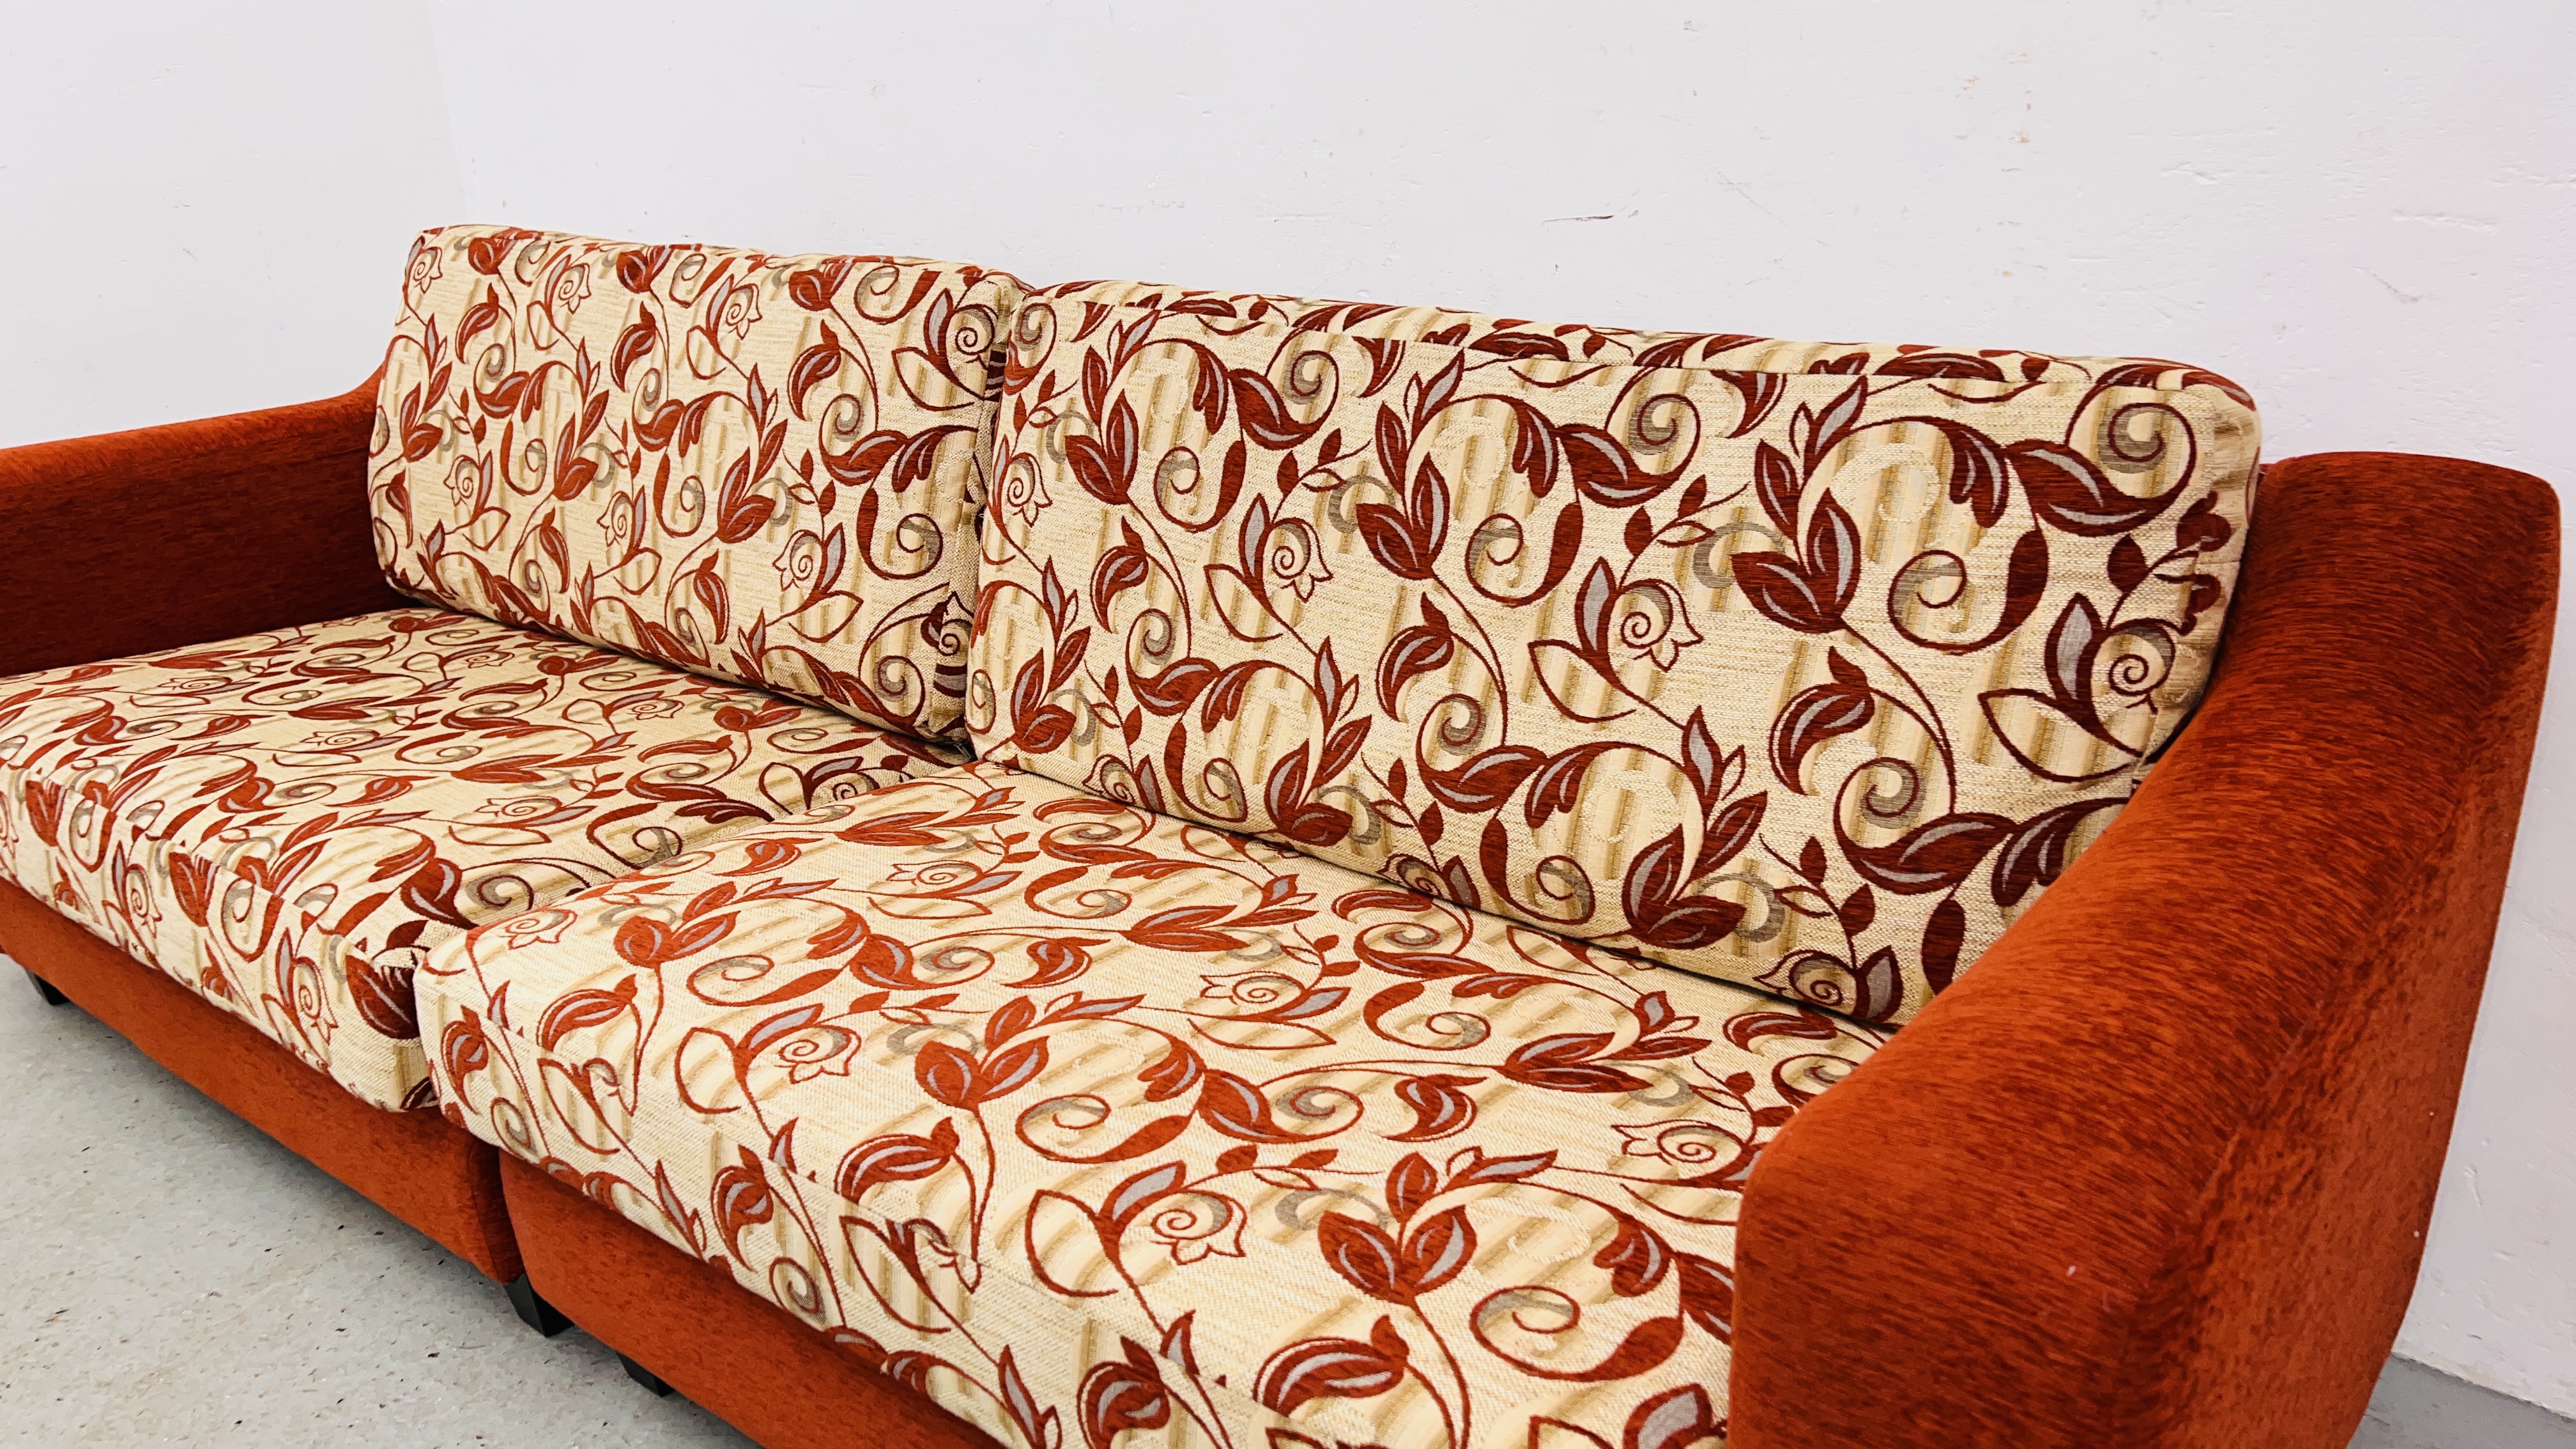 A LARGE MODERN RED UPHOLSTERED SOFA, WITH PATTERNED CUSHIONS - L 260CM. X H 80CM. X D 90CM. - Image 2 of 10